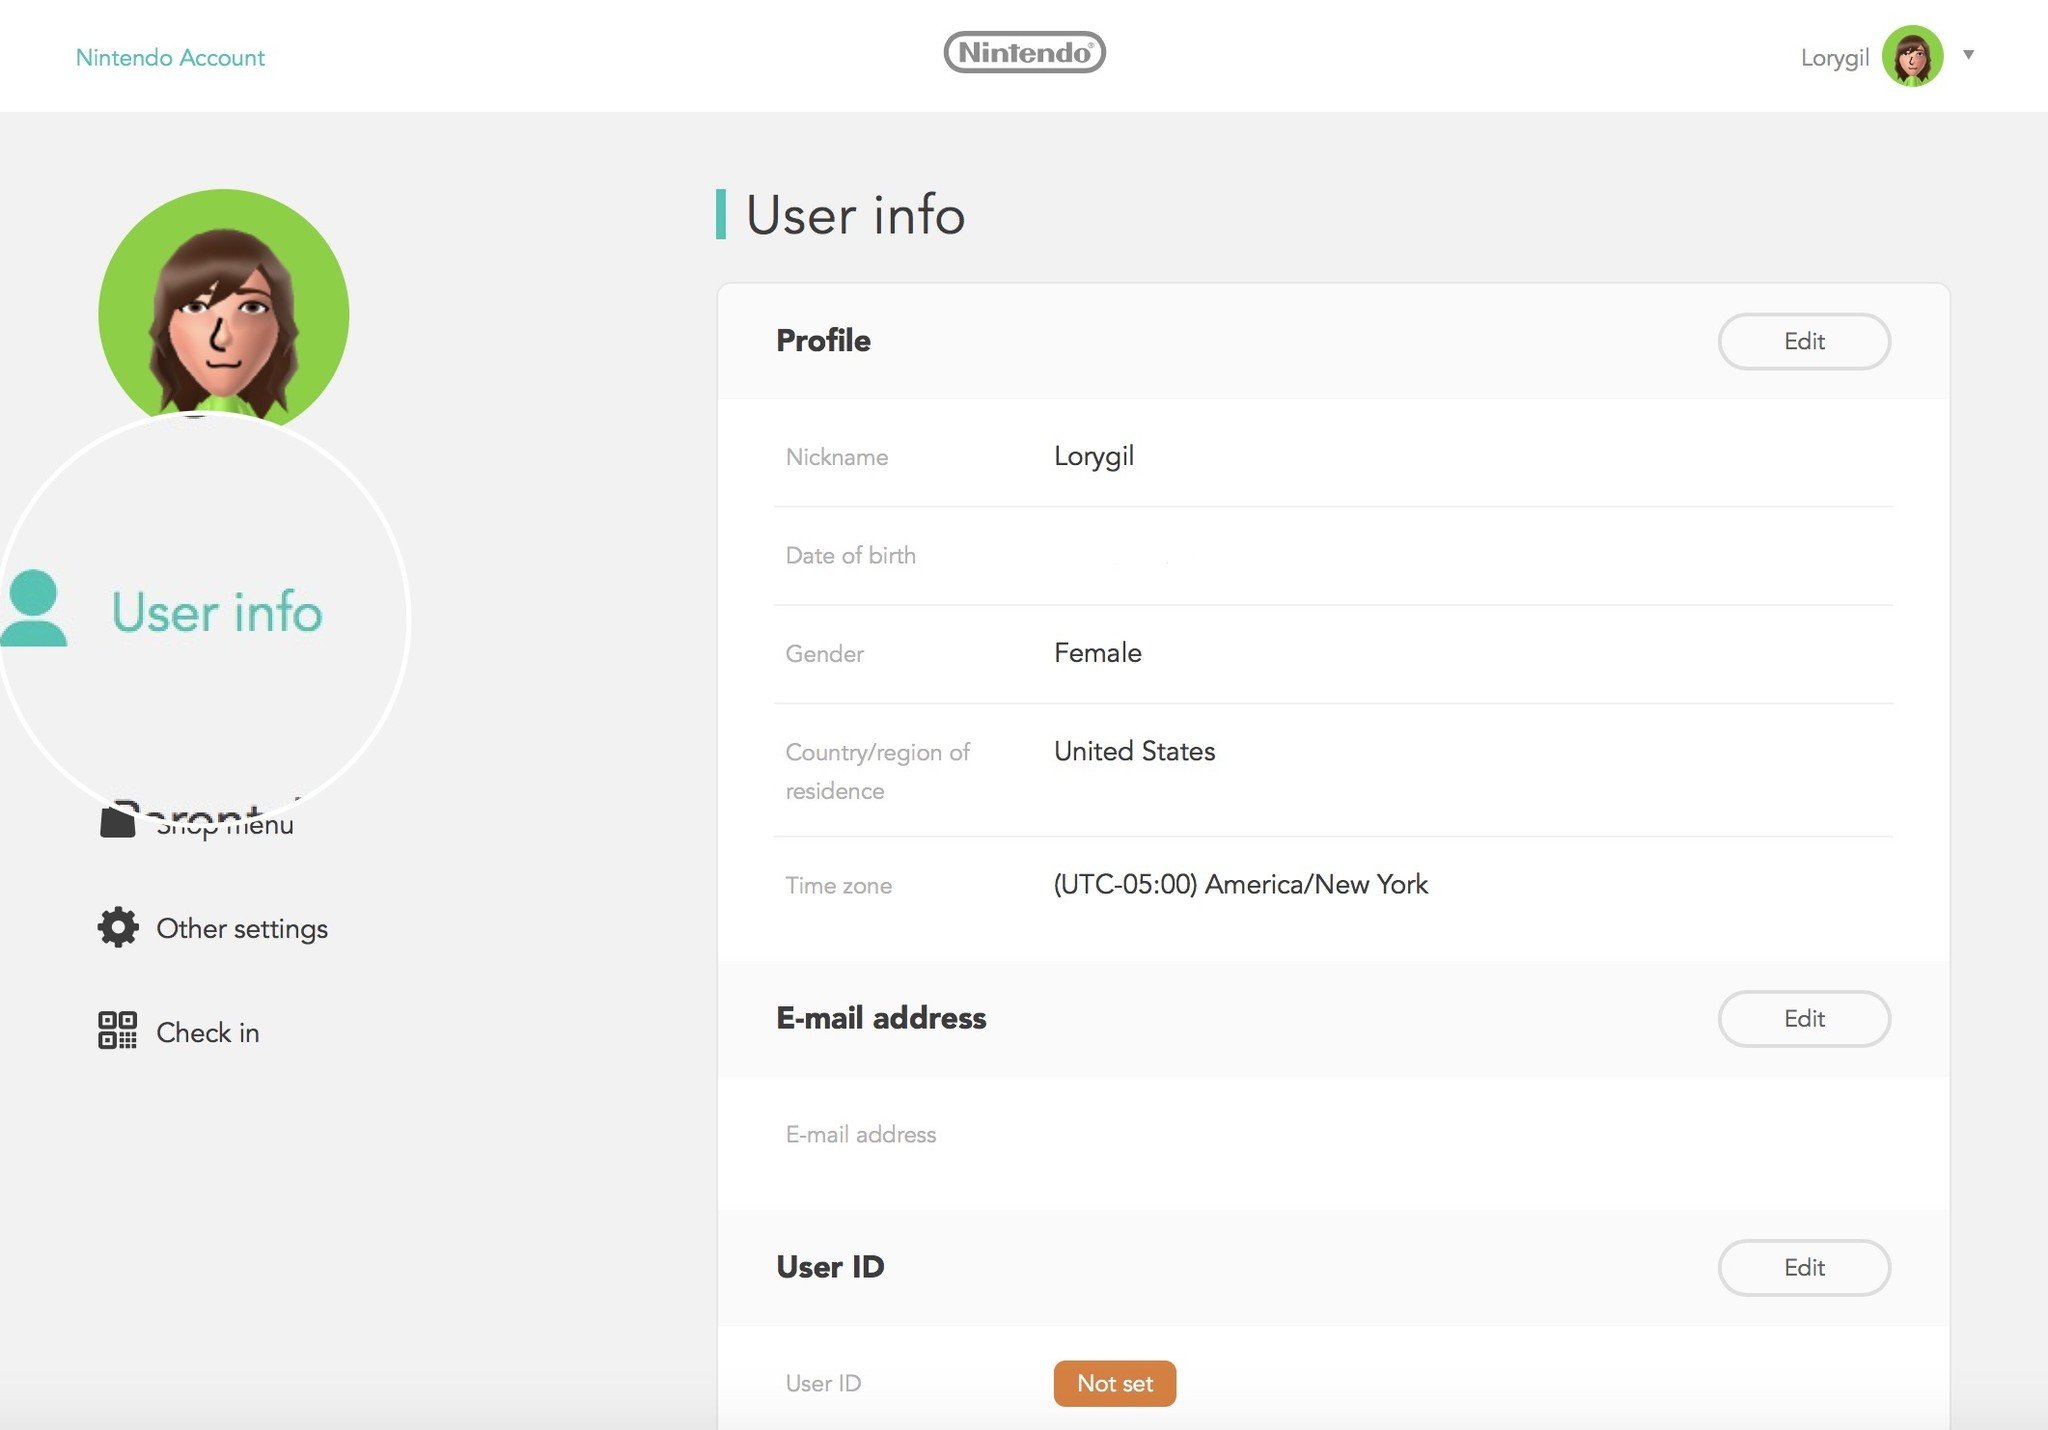 Link the Nintendo Network ID to the Nintendo Account by selecting User Info on the left side of the screen